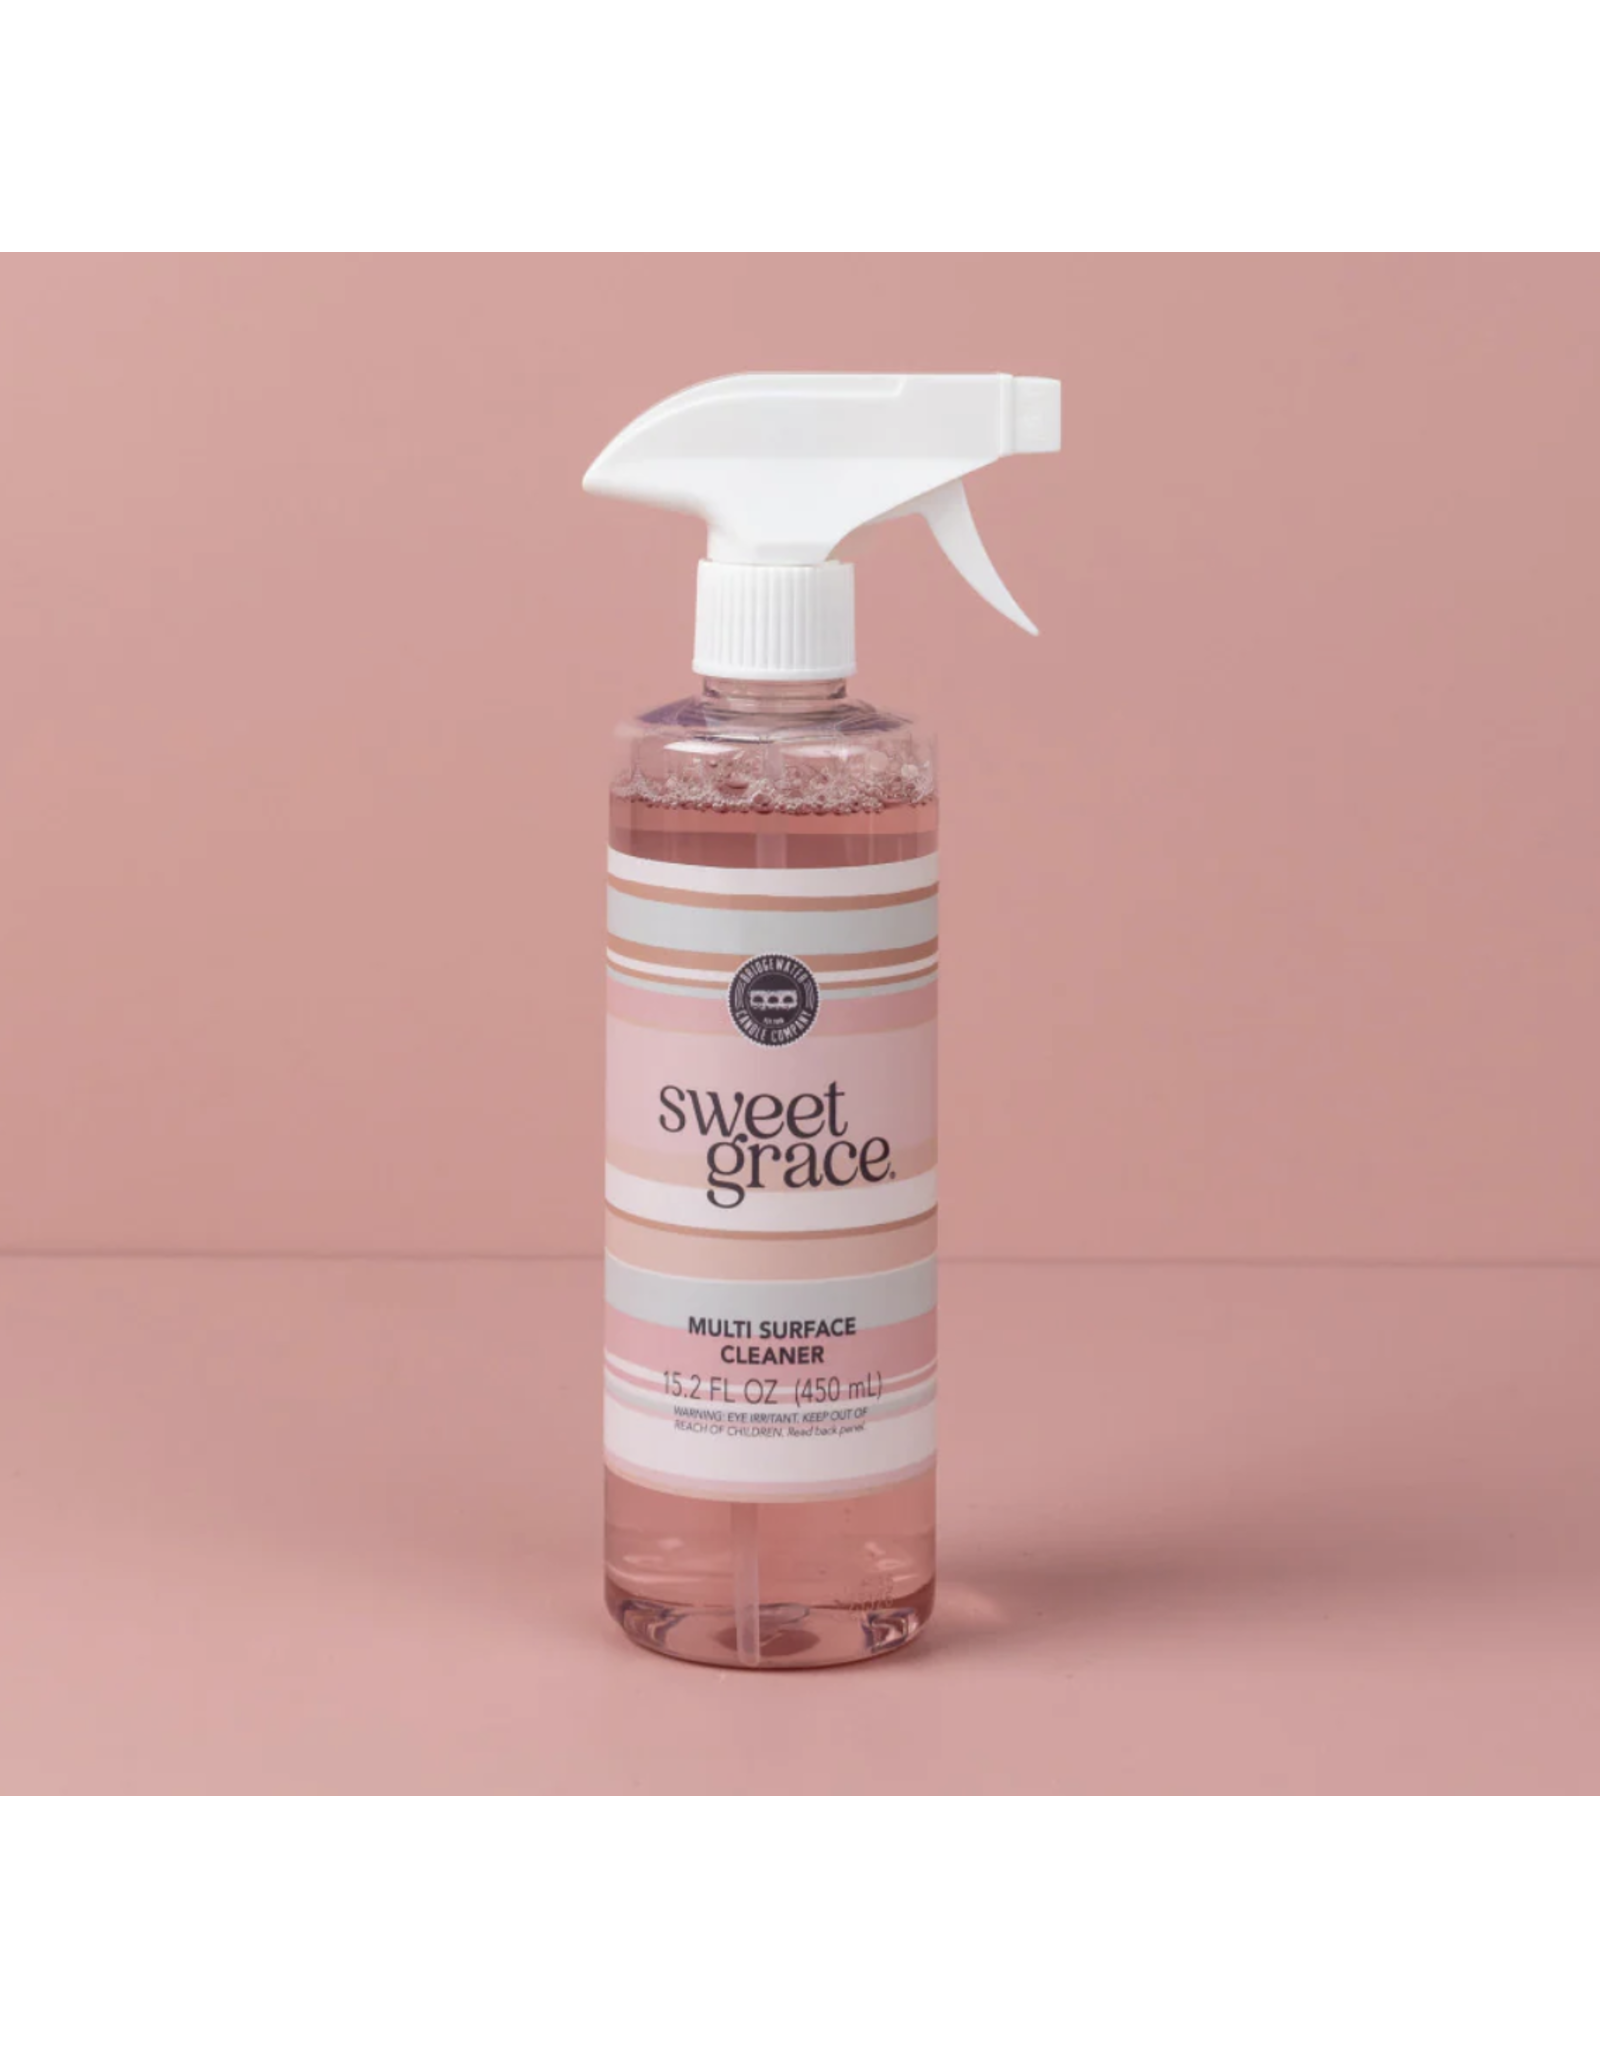 Bridgewater Candle Company Sweet Grace MultiSurface Cleaner